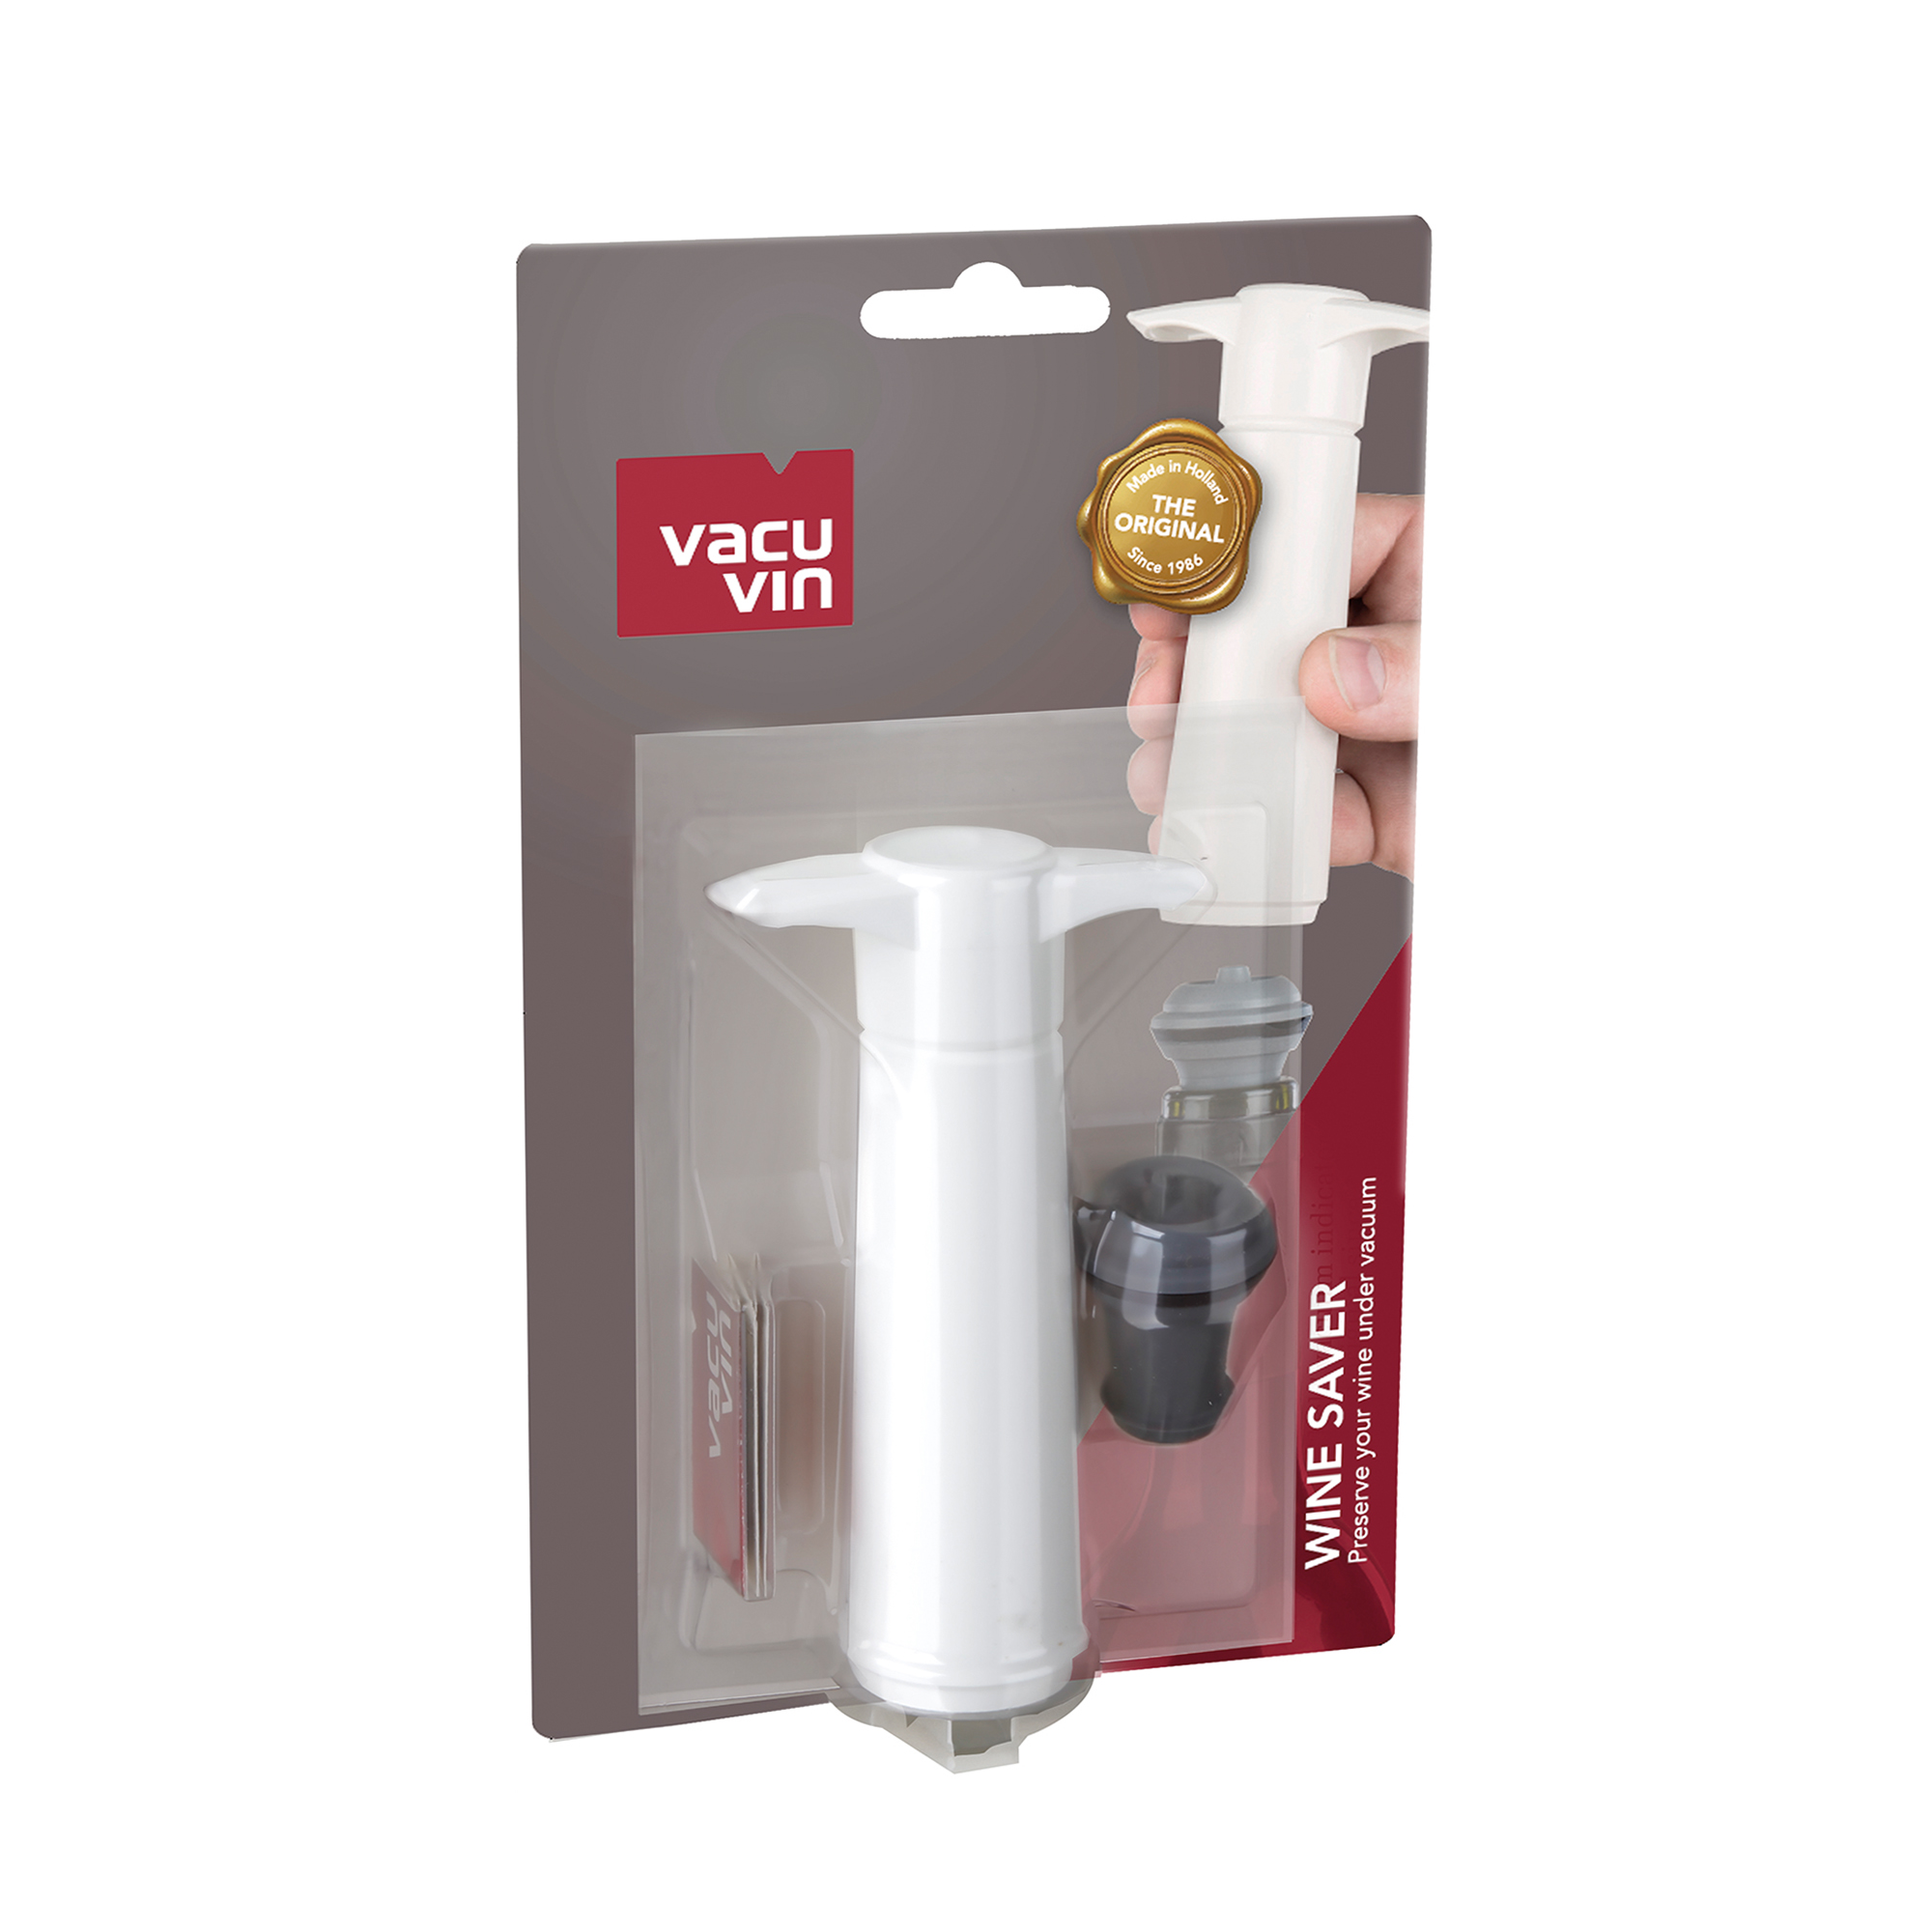 Vacu Vin Wine Saver Pump White with Vacuum Wine Stopper - Keep Your Wine  Fresh for up to 10 Days - 1 Pump 2 Stoppers - Reusable - Made in the